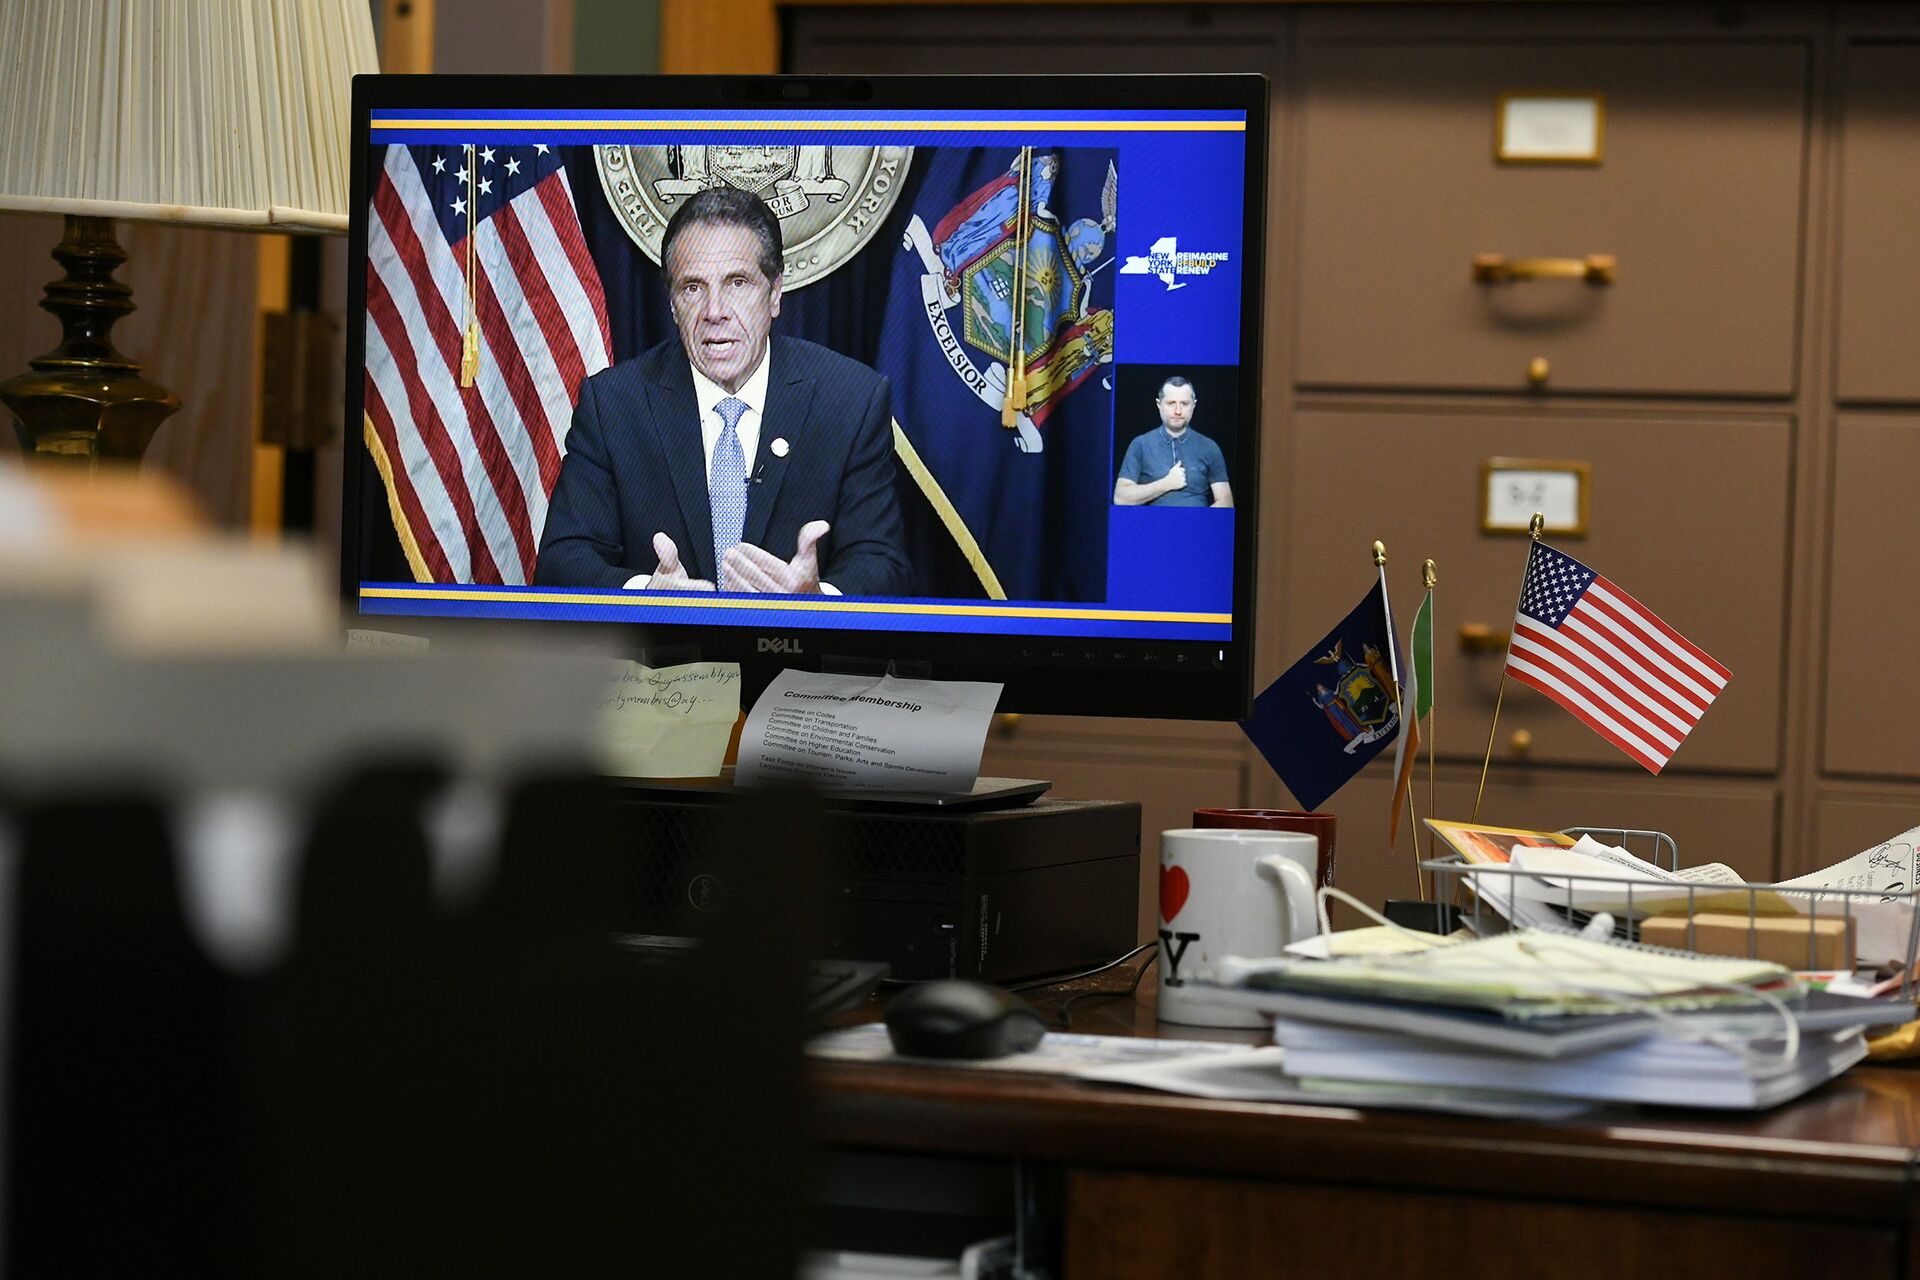 Governor Andrew Cuomo's resignation is seen on a computer screen in Assemblywoman Patricia Fahy's office at the Legislative Office Building in Albany, New York, U.S., August 10, 2021 - Sputnik International, 1920, 07.09.2021